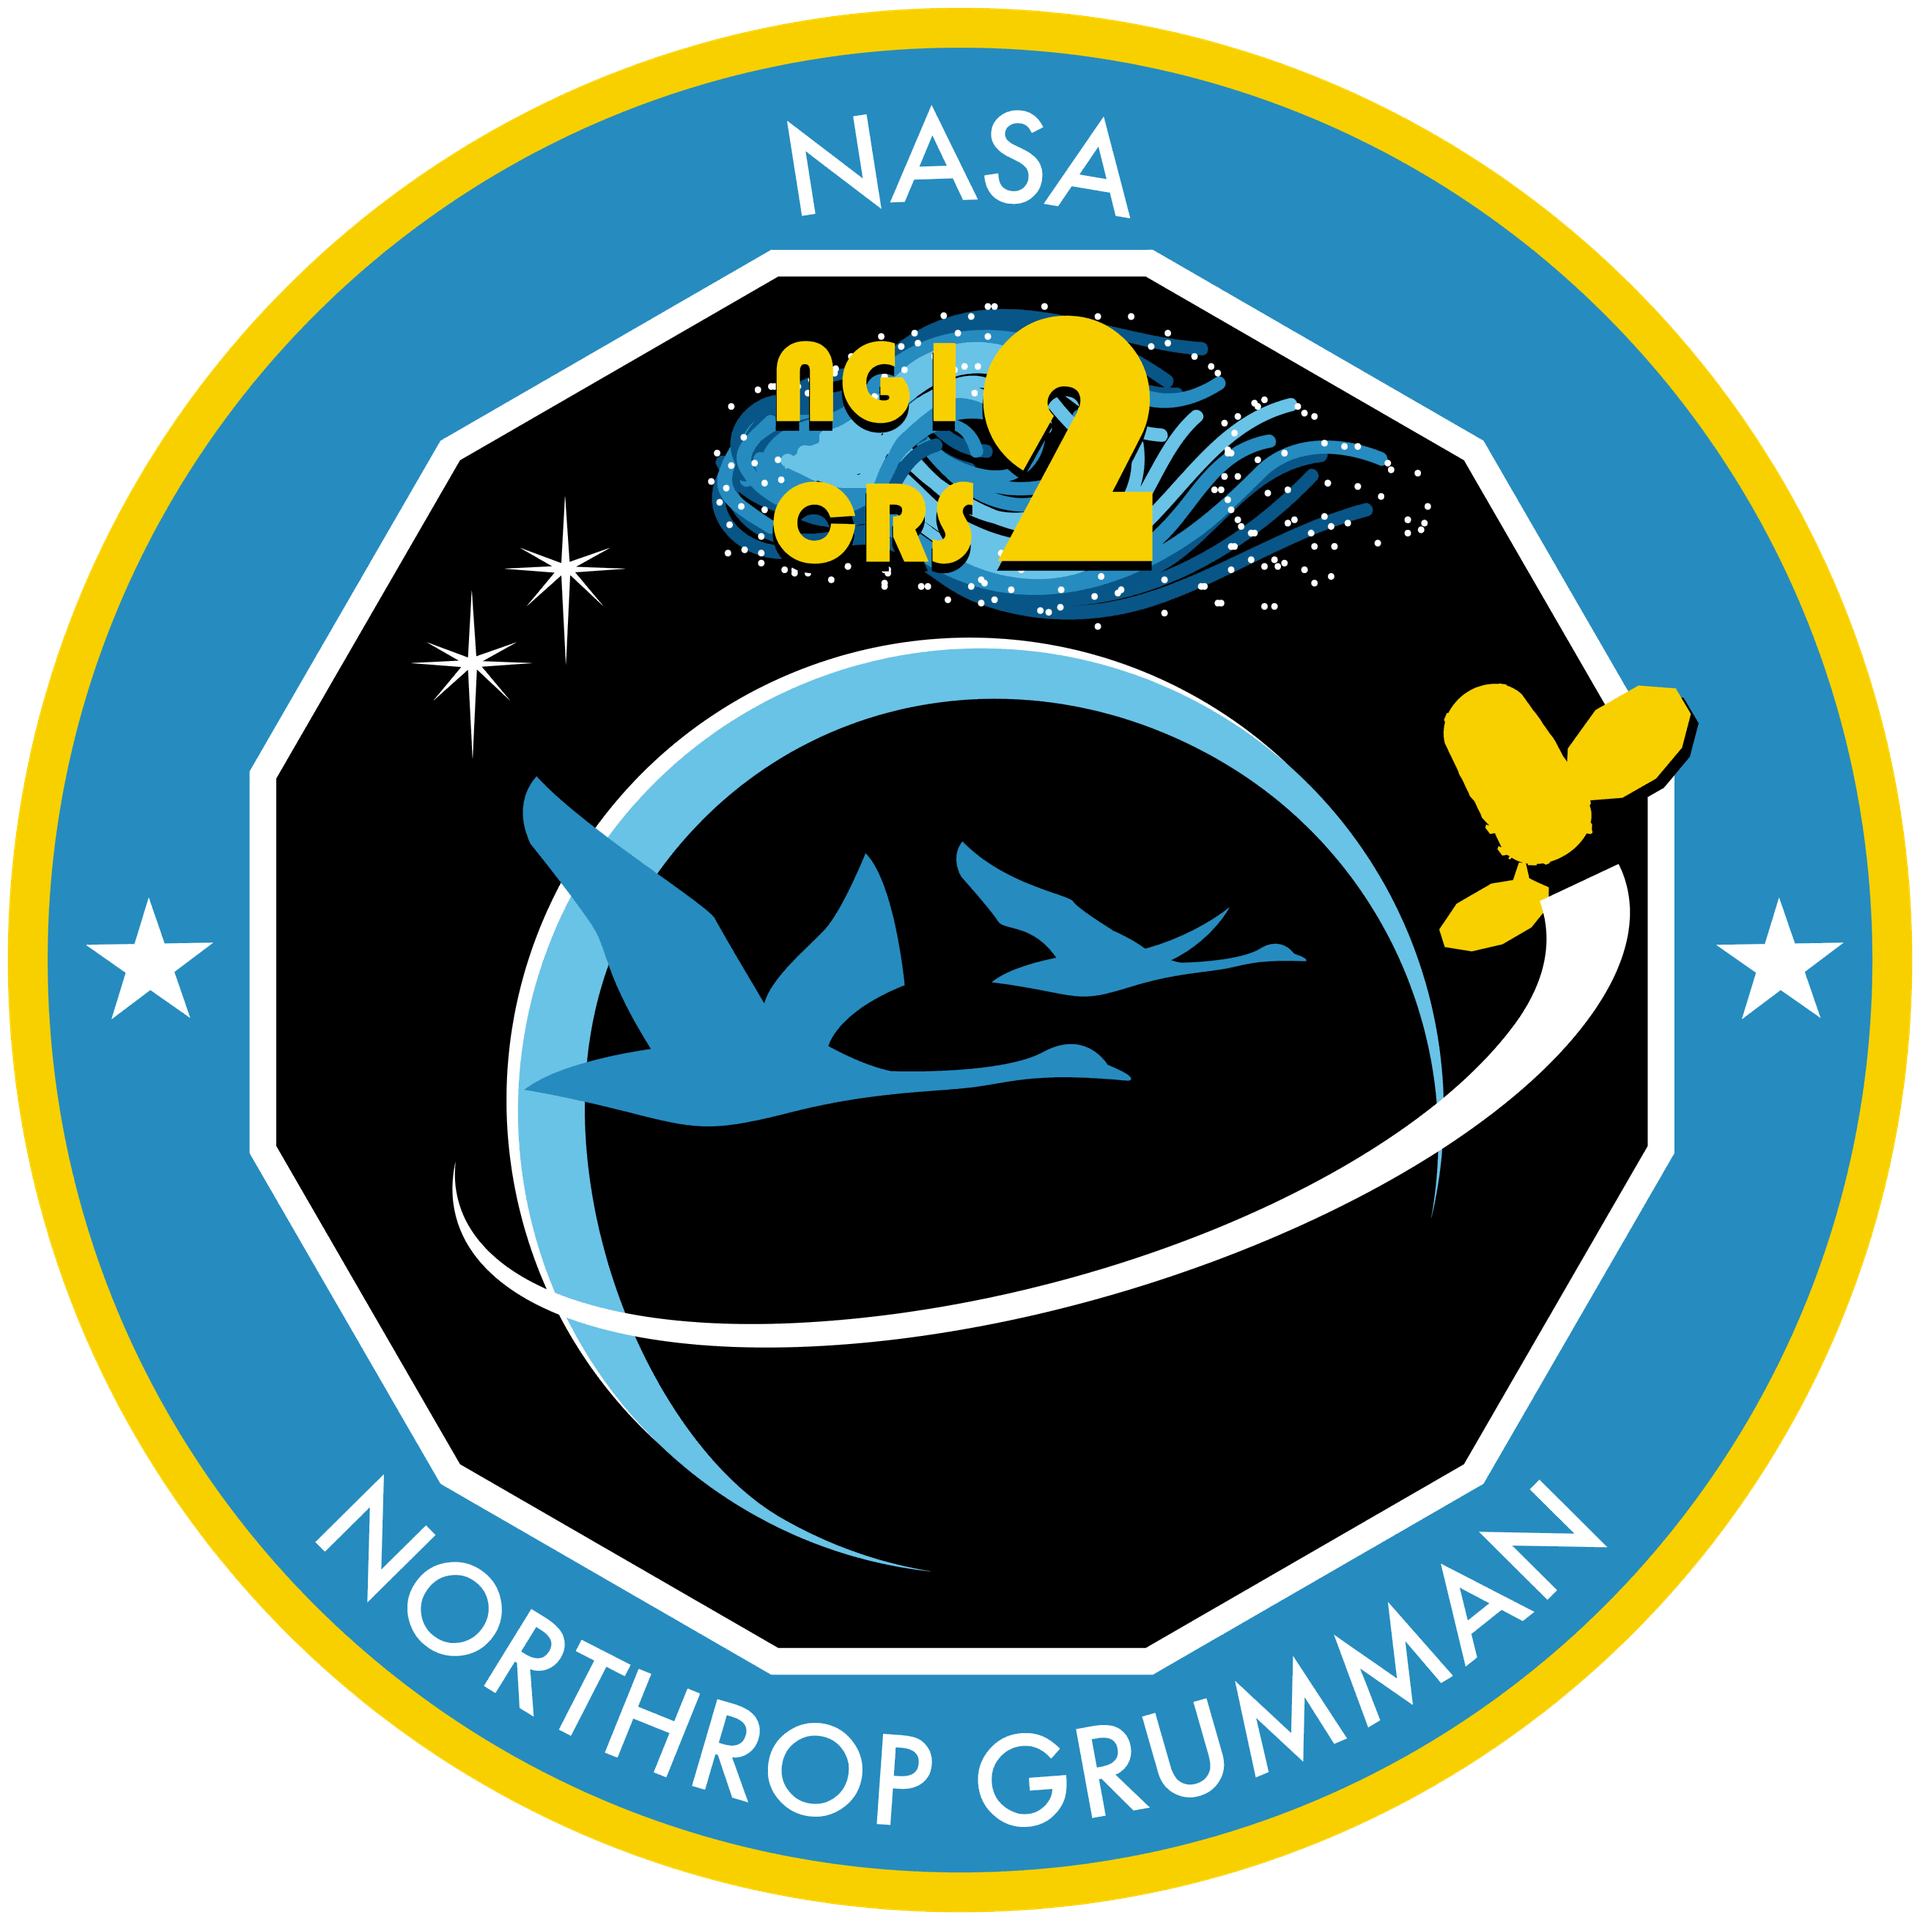 Mission patch for Cygnus CRS-2 NG-12 (S.S. Alan Bean)